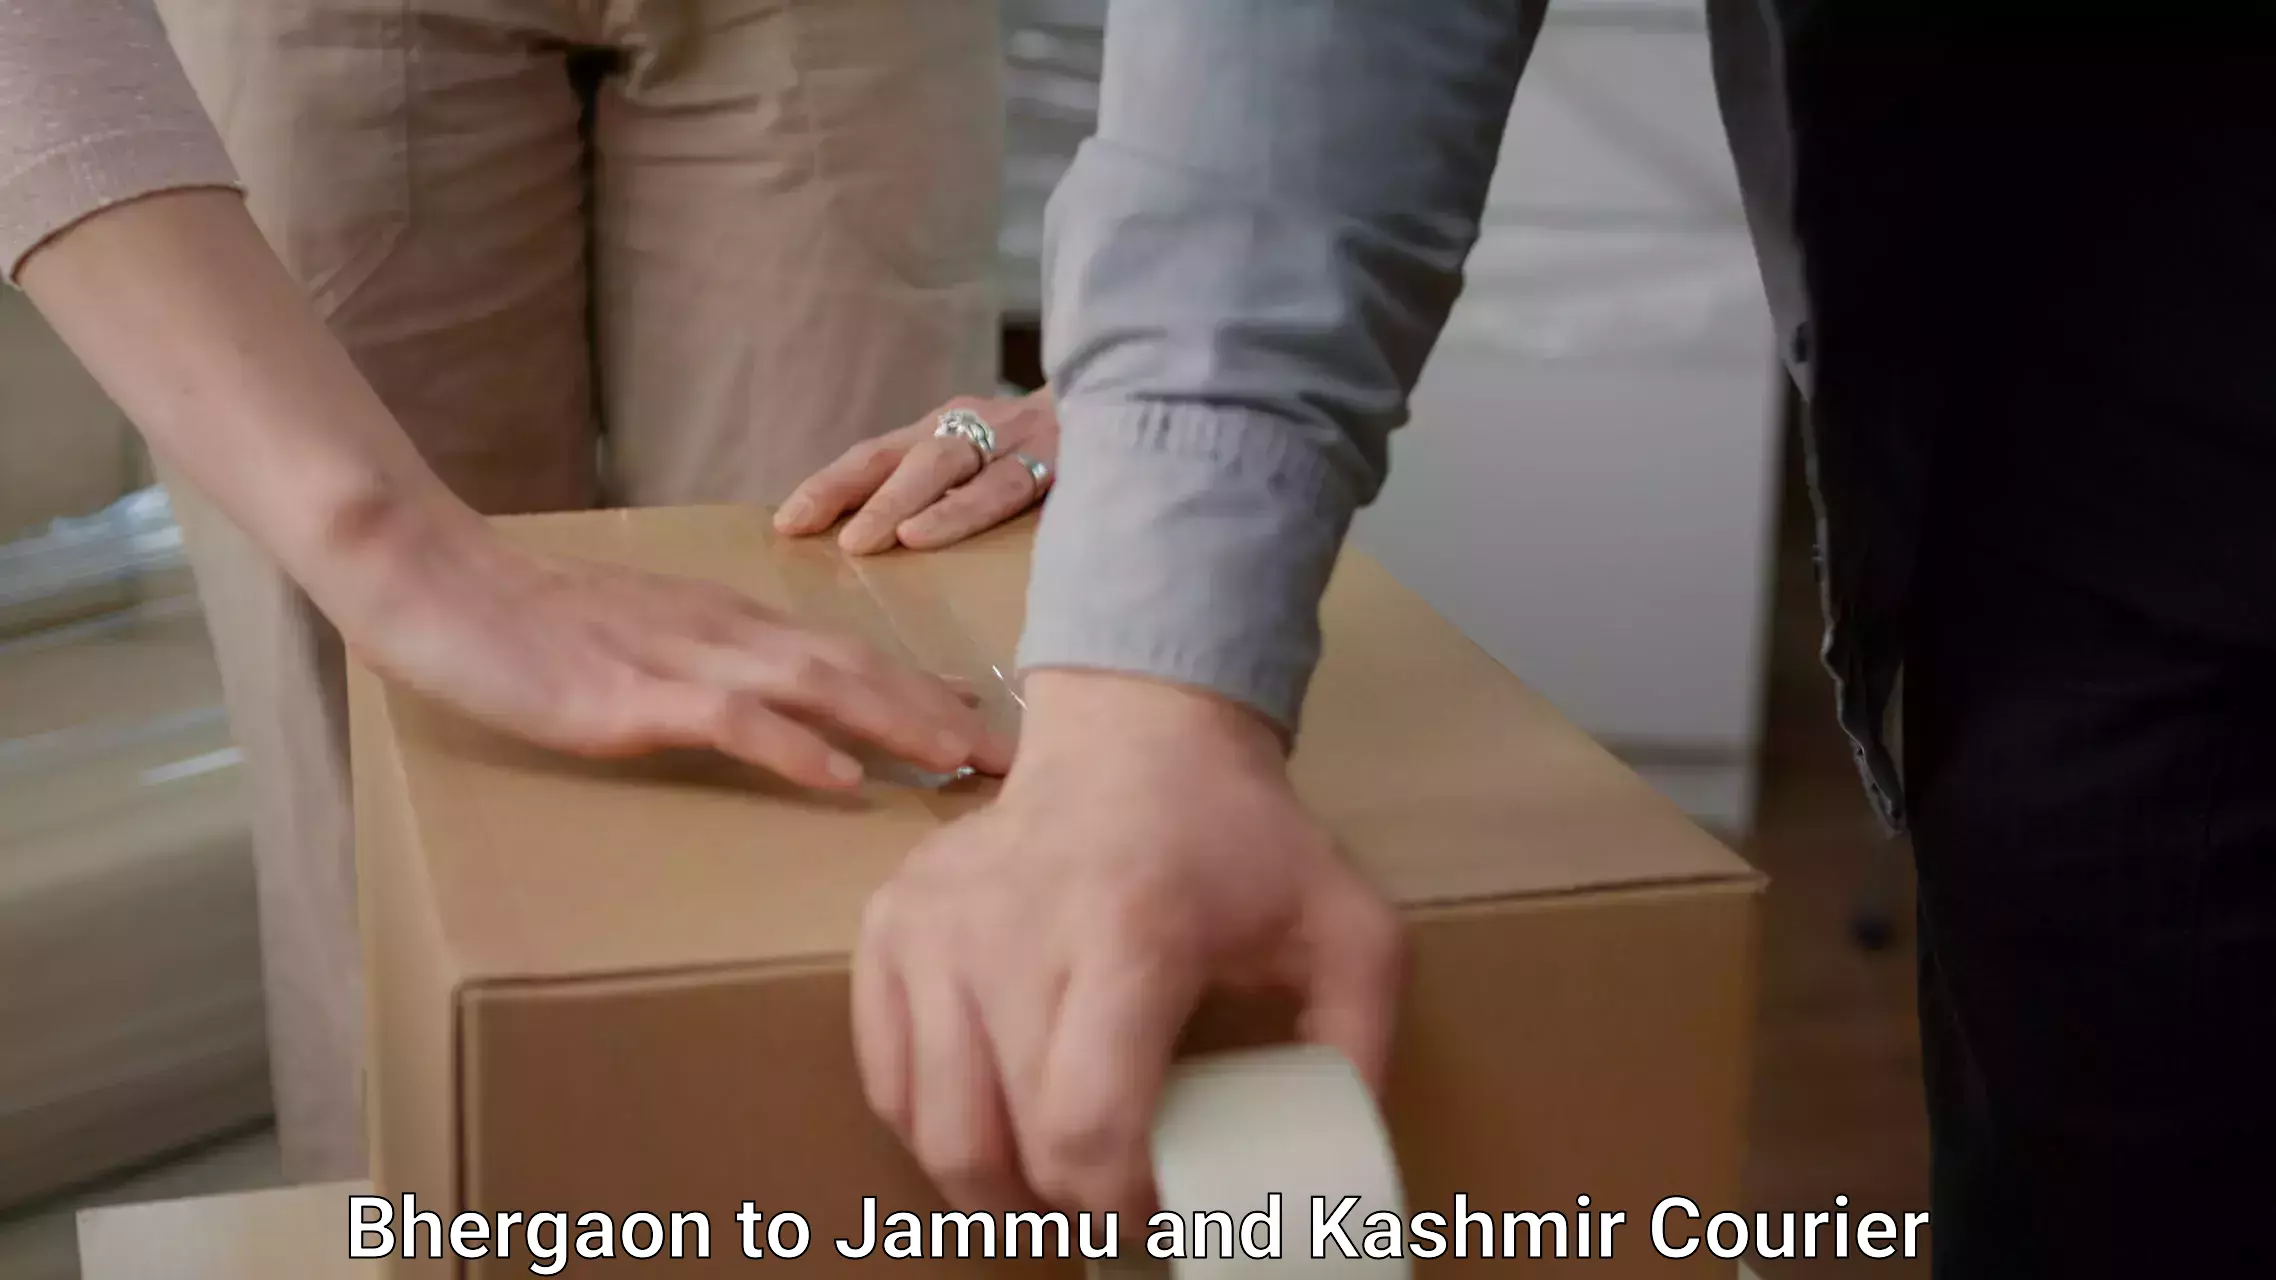 Home relocation experts Bhergaon to Baramulla